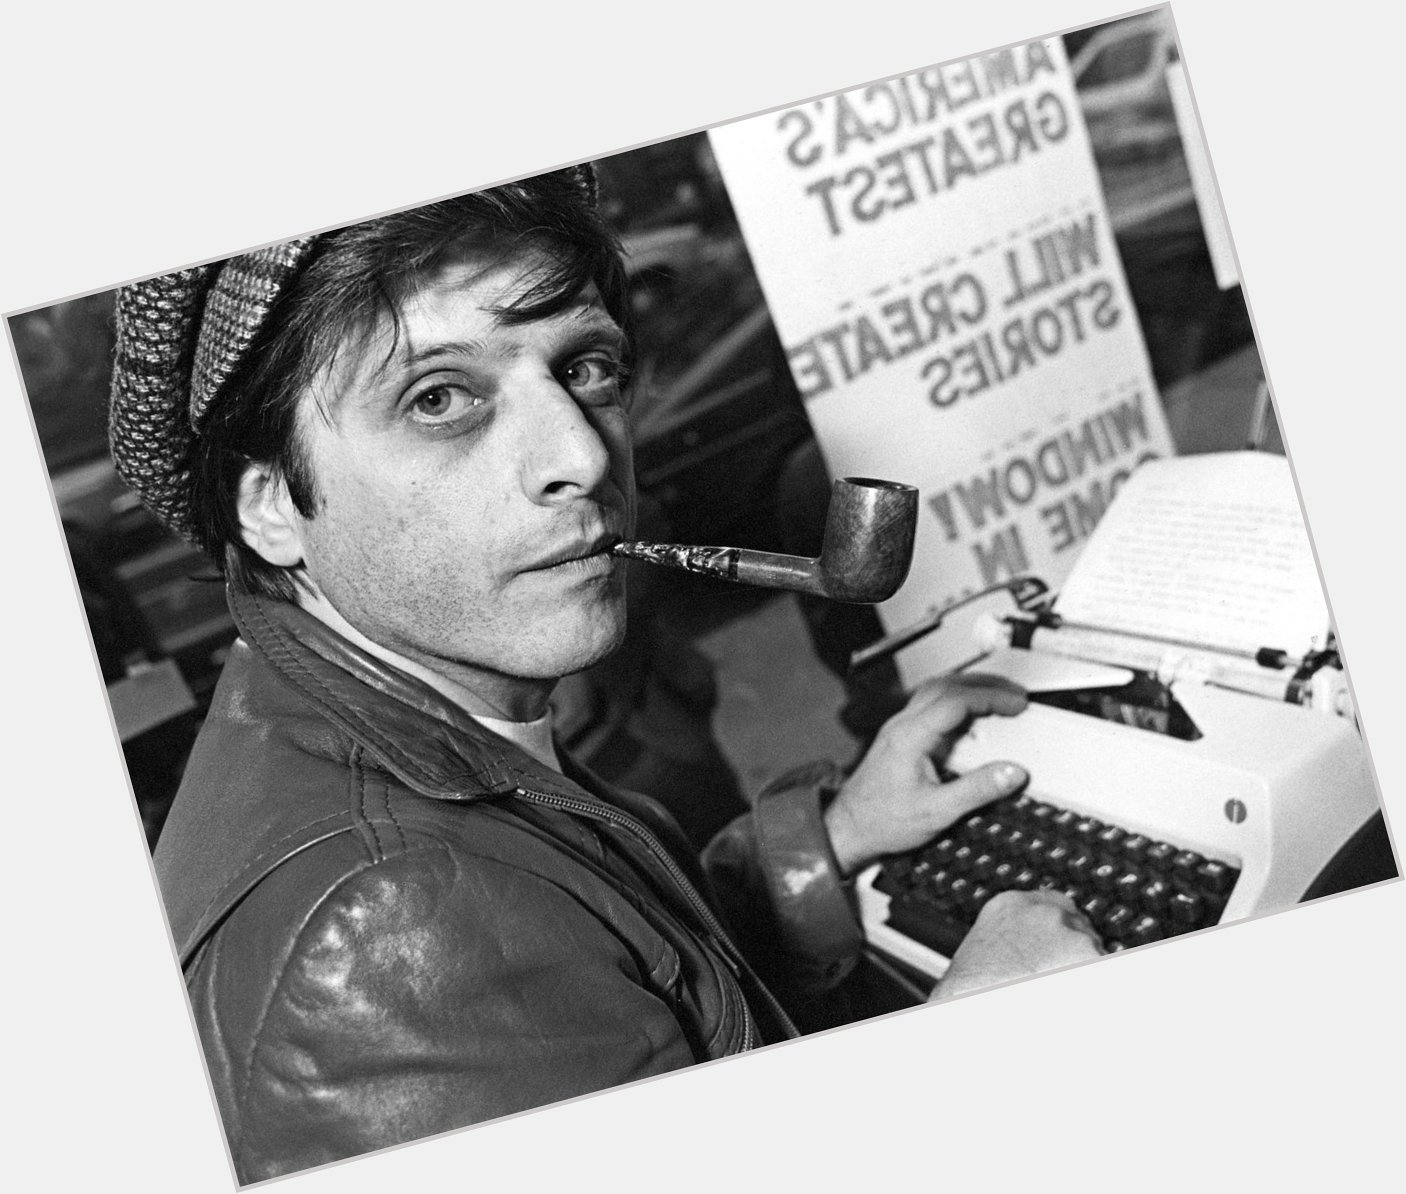 Happy Birthday to one of the loudest and most energizing voices in literature, Harlan Ellison! 